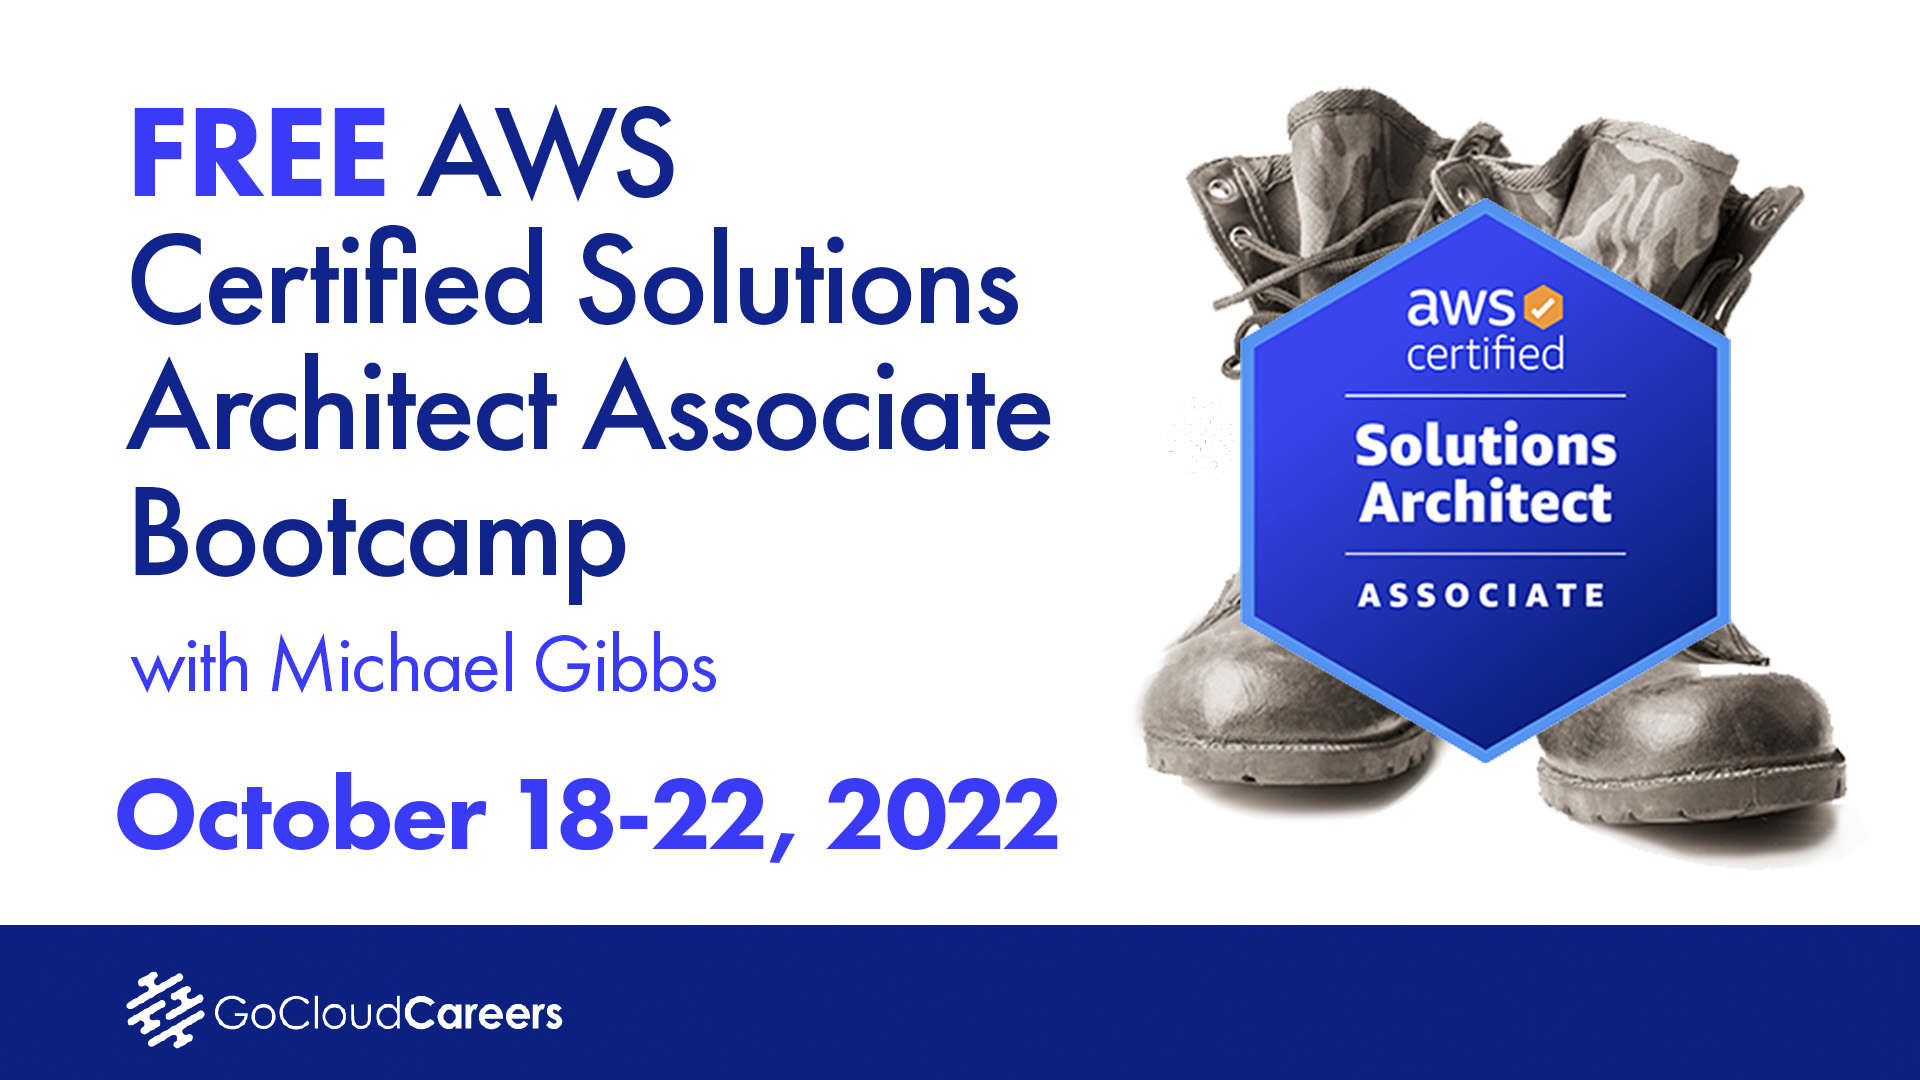 Ready go to ... https://www.gocloudcareers.com/aws-october-bootcamp [ FREE AWS Certified Solutions Architect Associate Live Bootcamp]